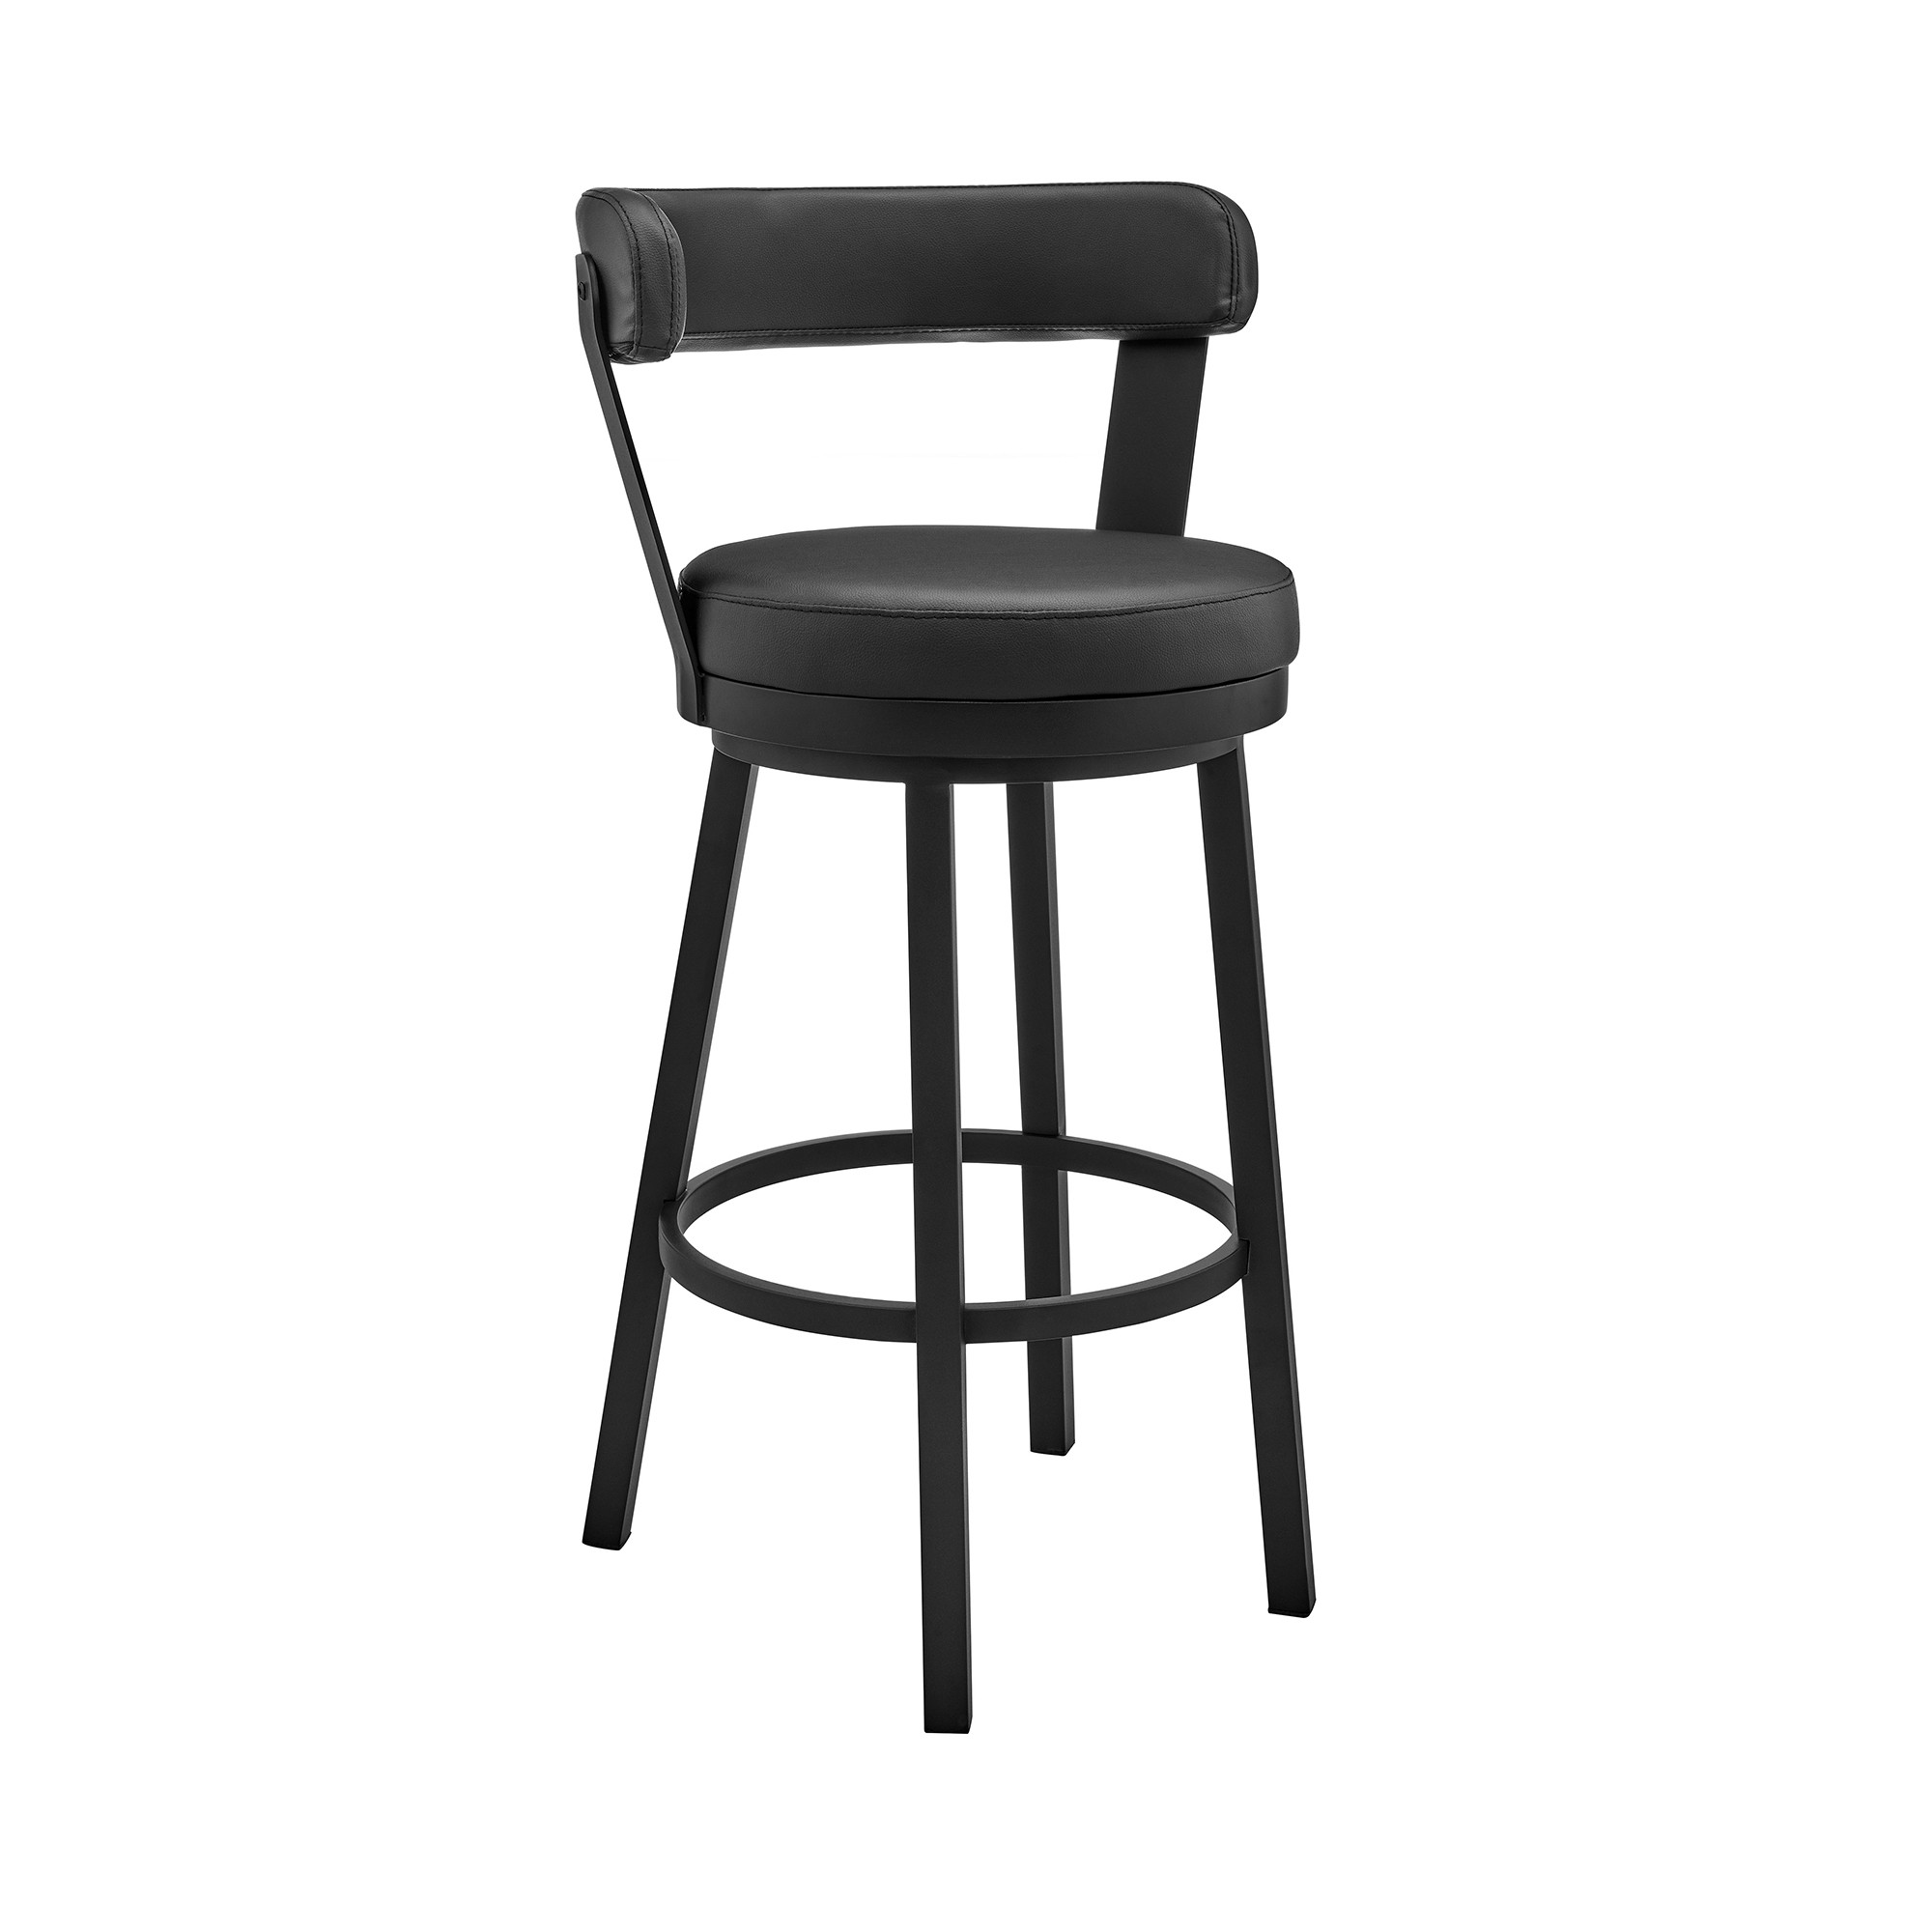 26" Chic Black Faux Leather with Black Finish Swivel Bar Stool